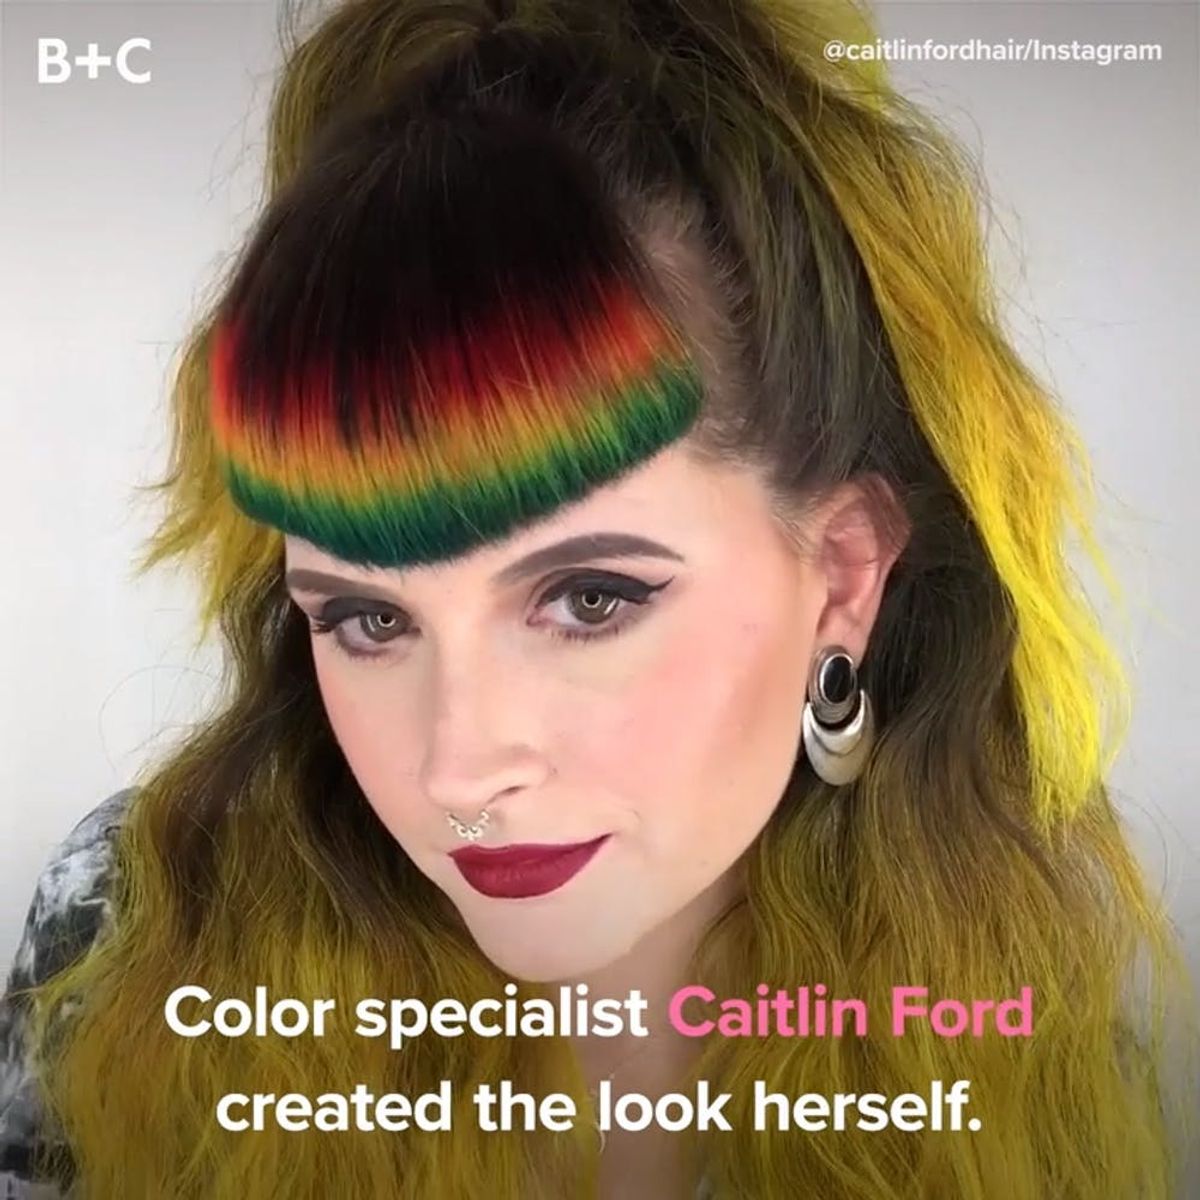 Rainbow Bangs Are the Trendy Hairstyle You HAVE to See